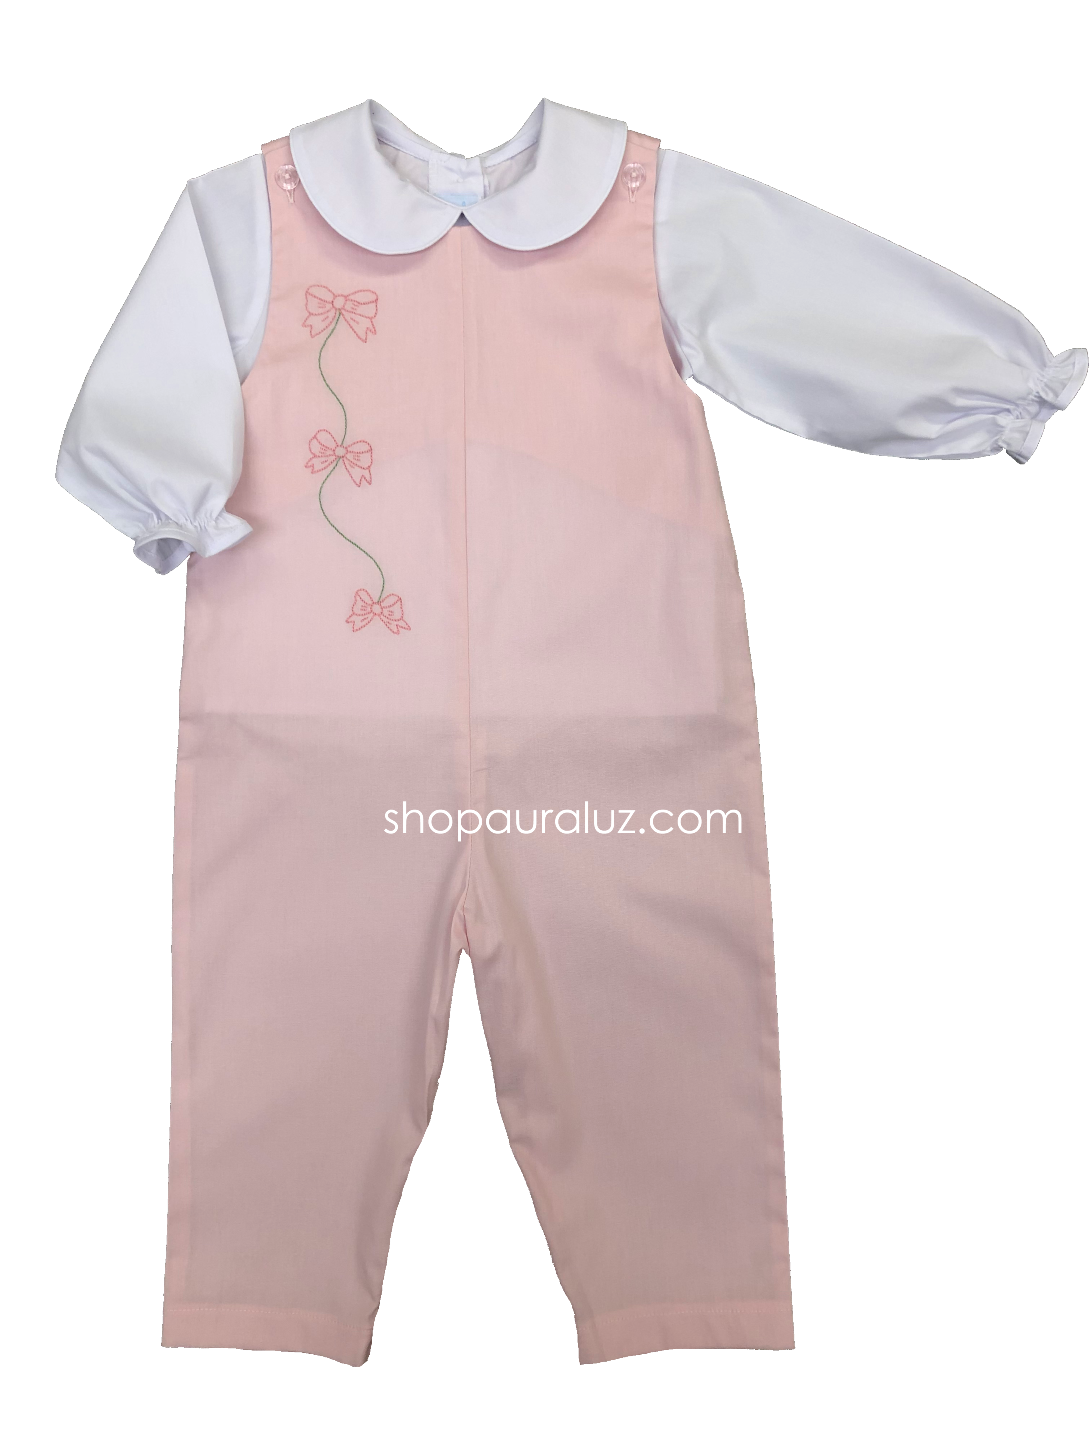 Auraluz Overall/Blouse Set...Pink with embroidered bows